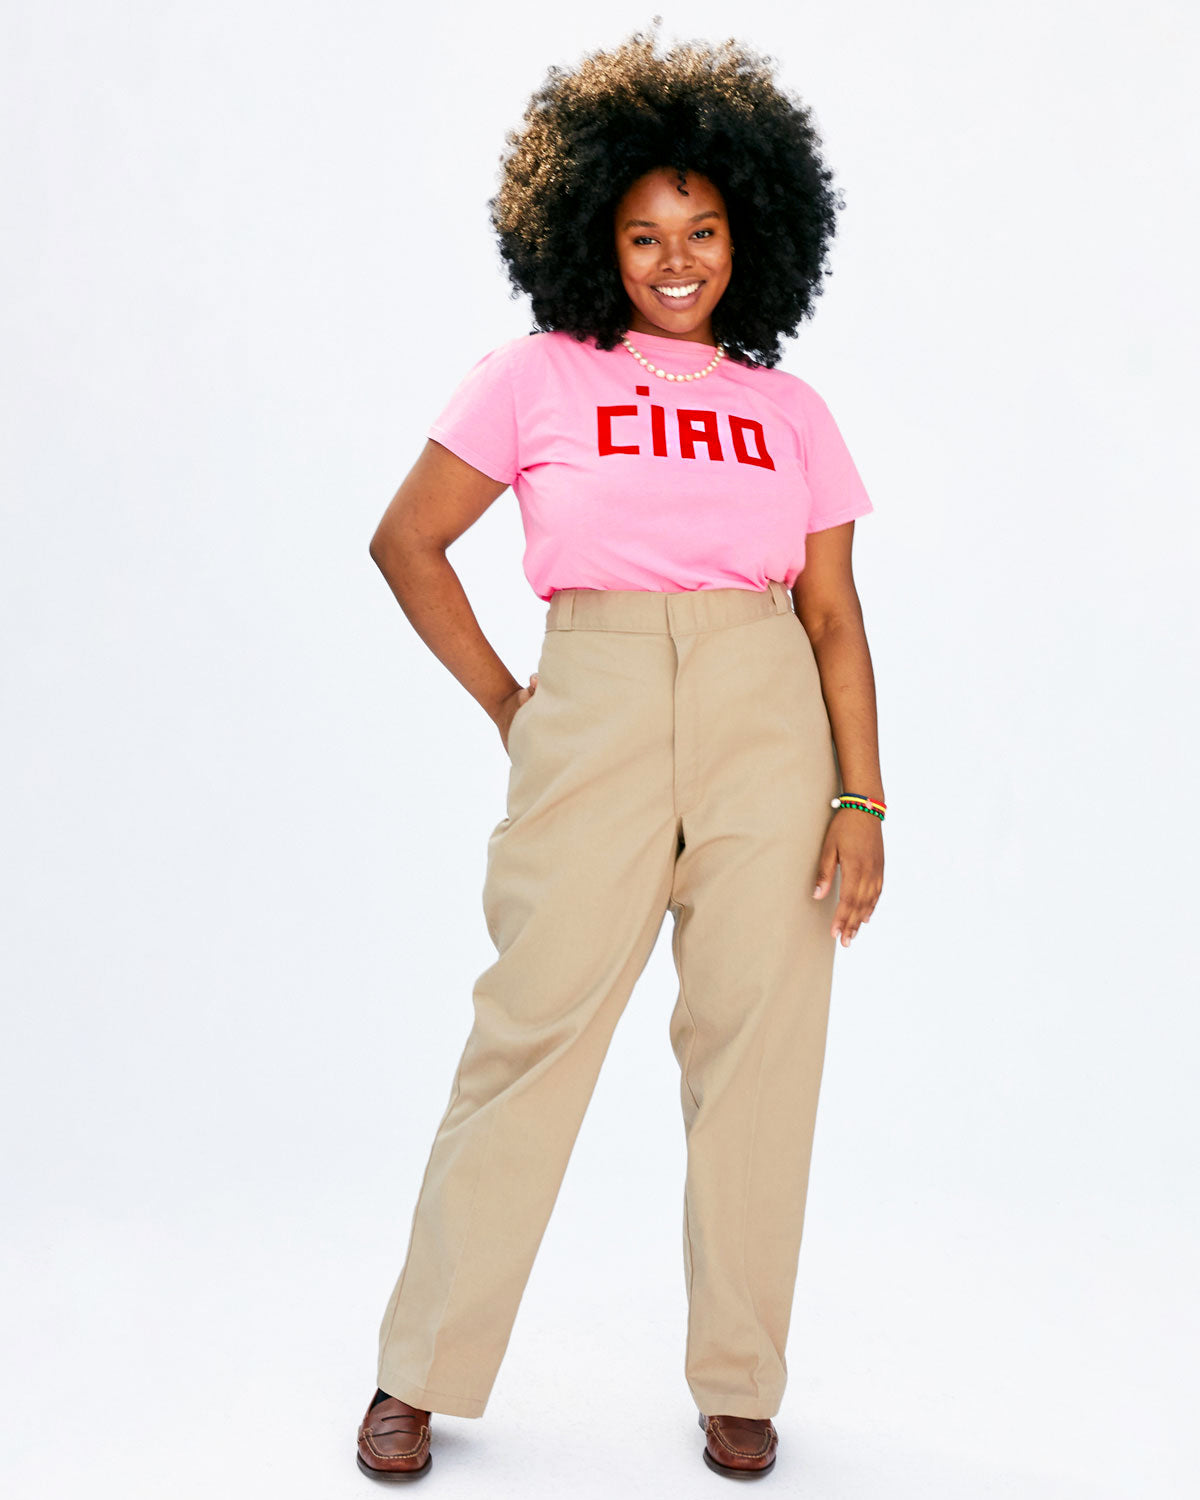 Candace in the Neon Pink Ciao Classic Tee with Khaki Slacks